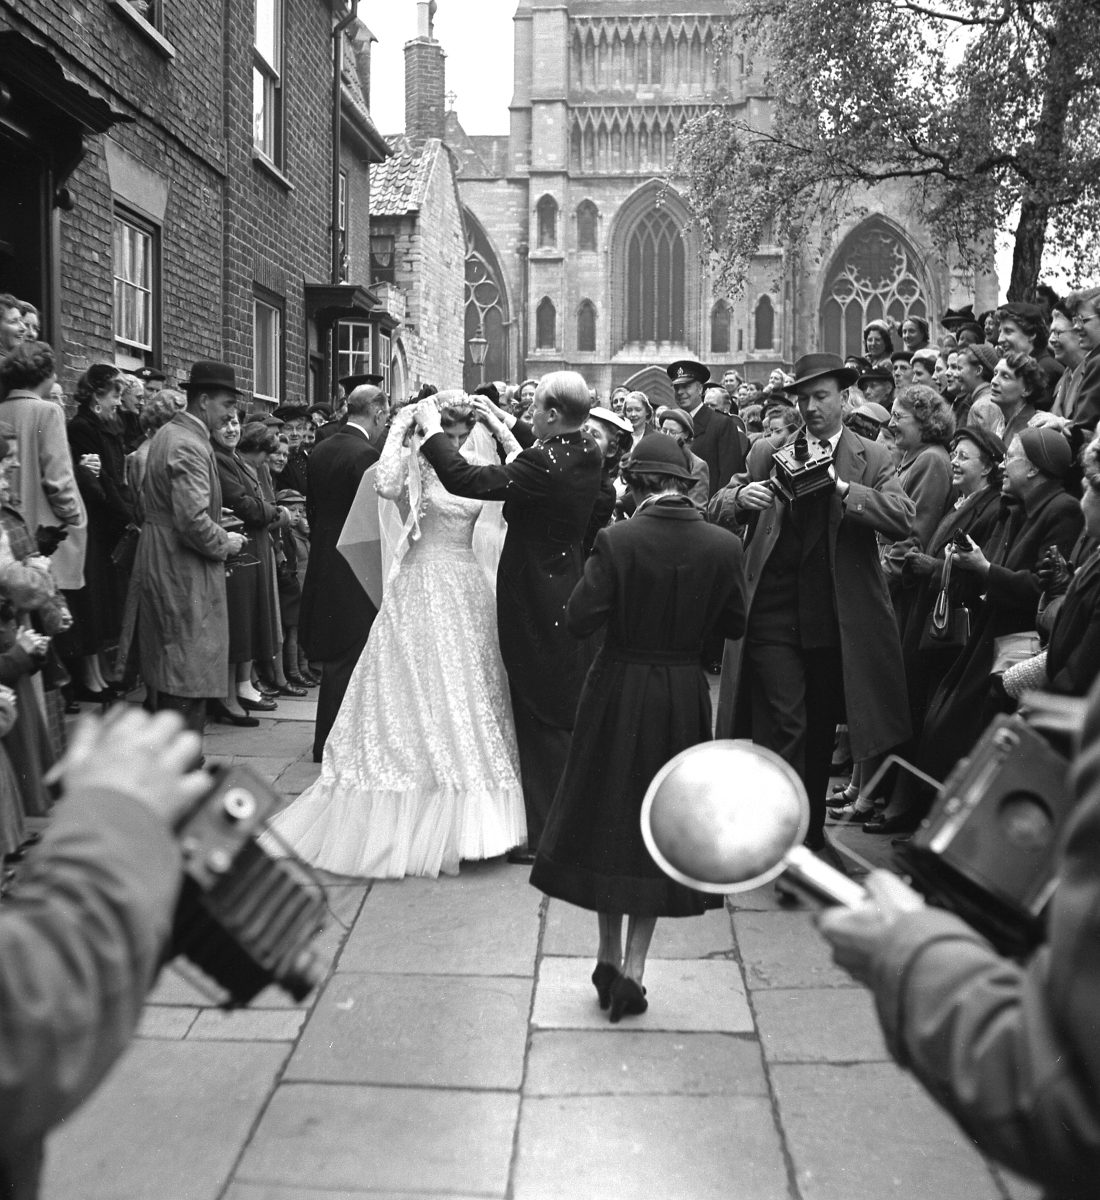 Crowds turn out for celebrity wedding